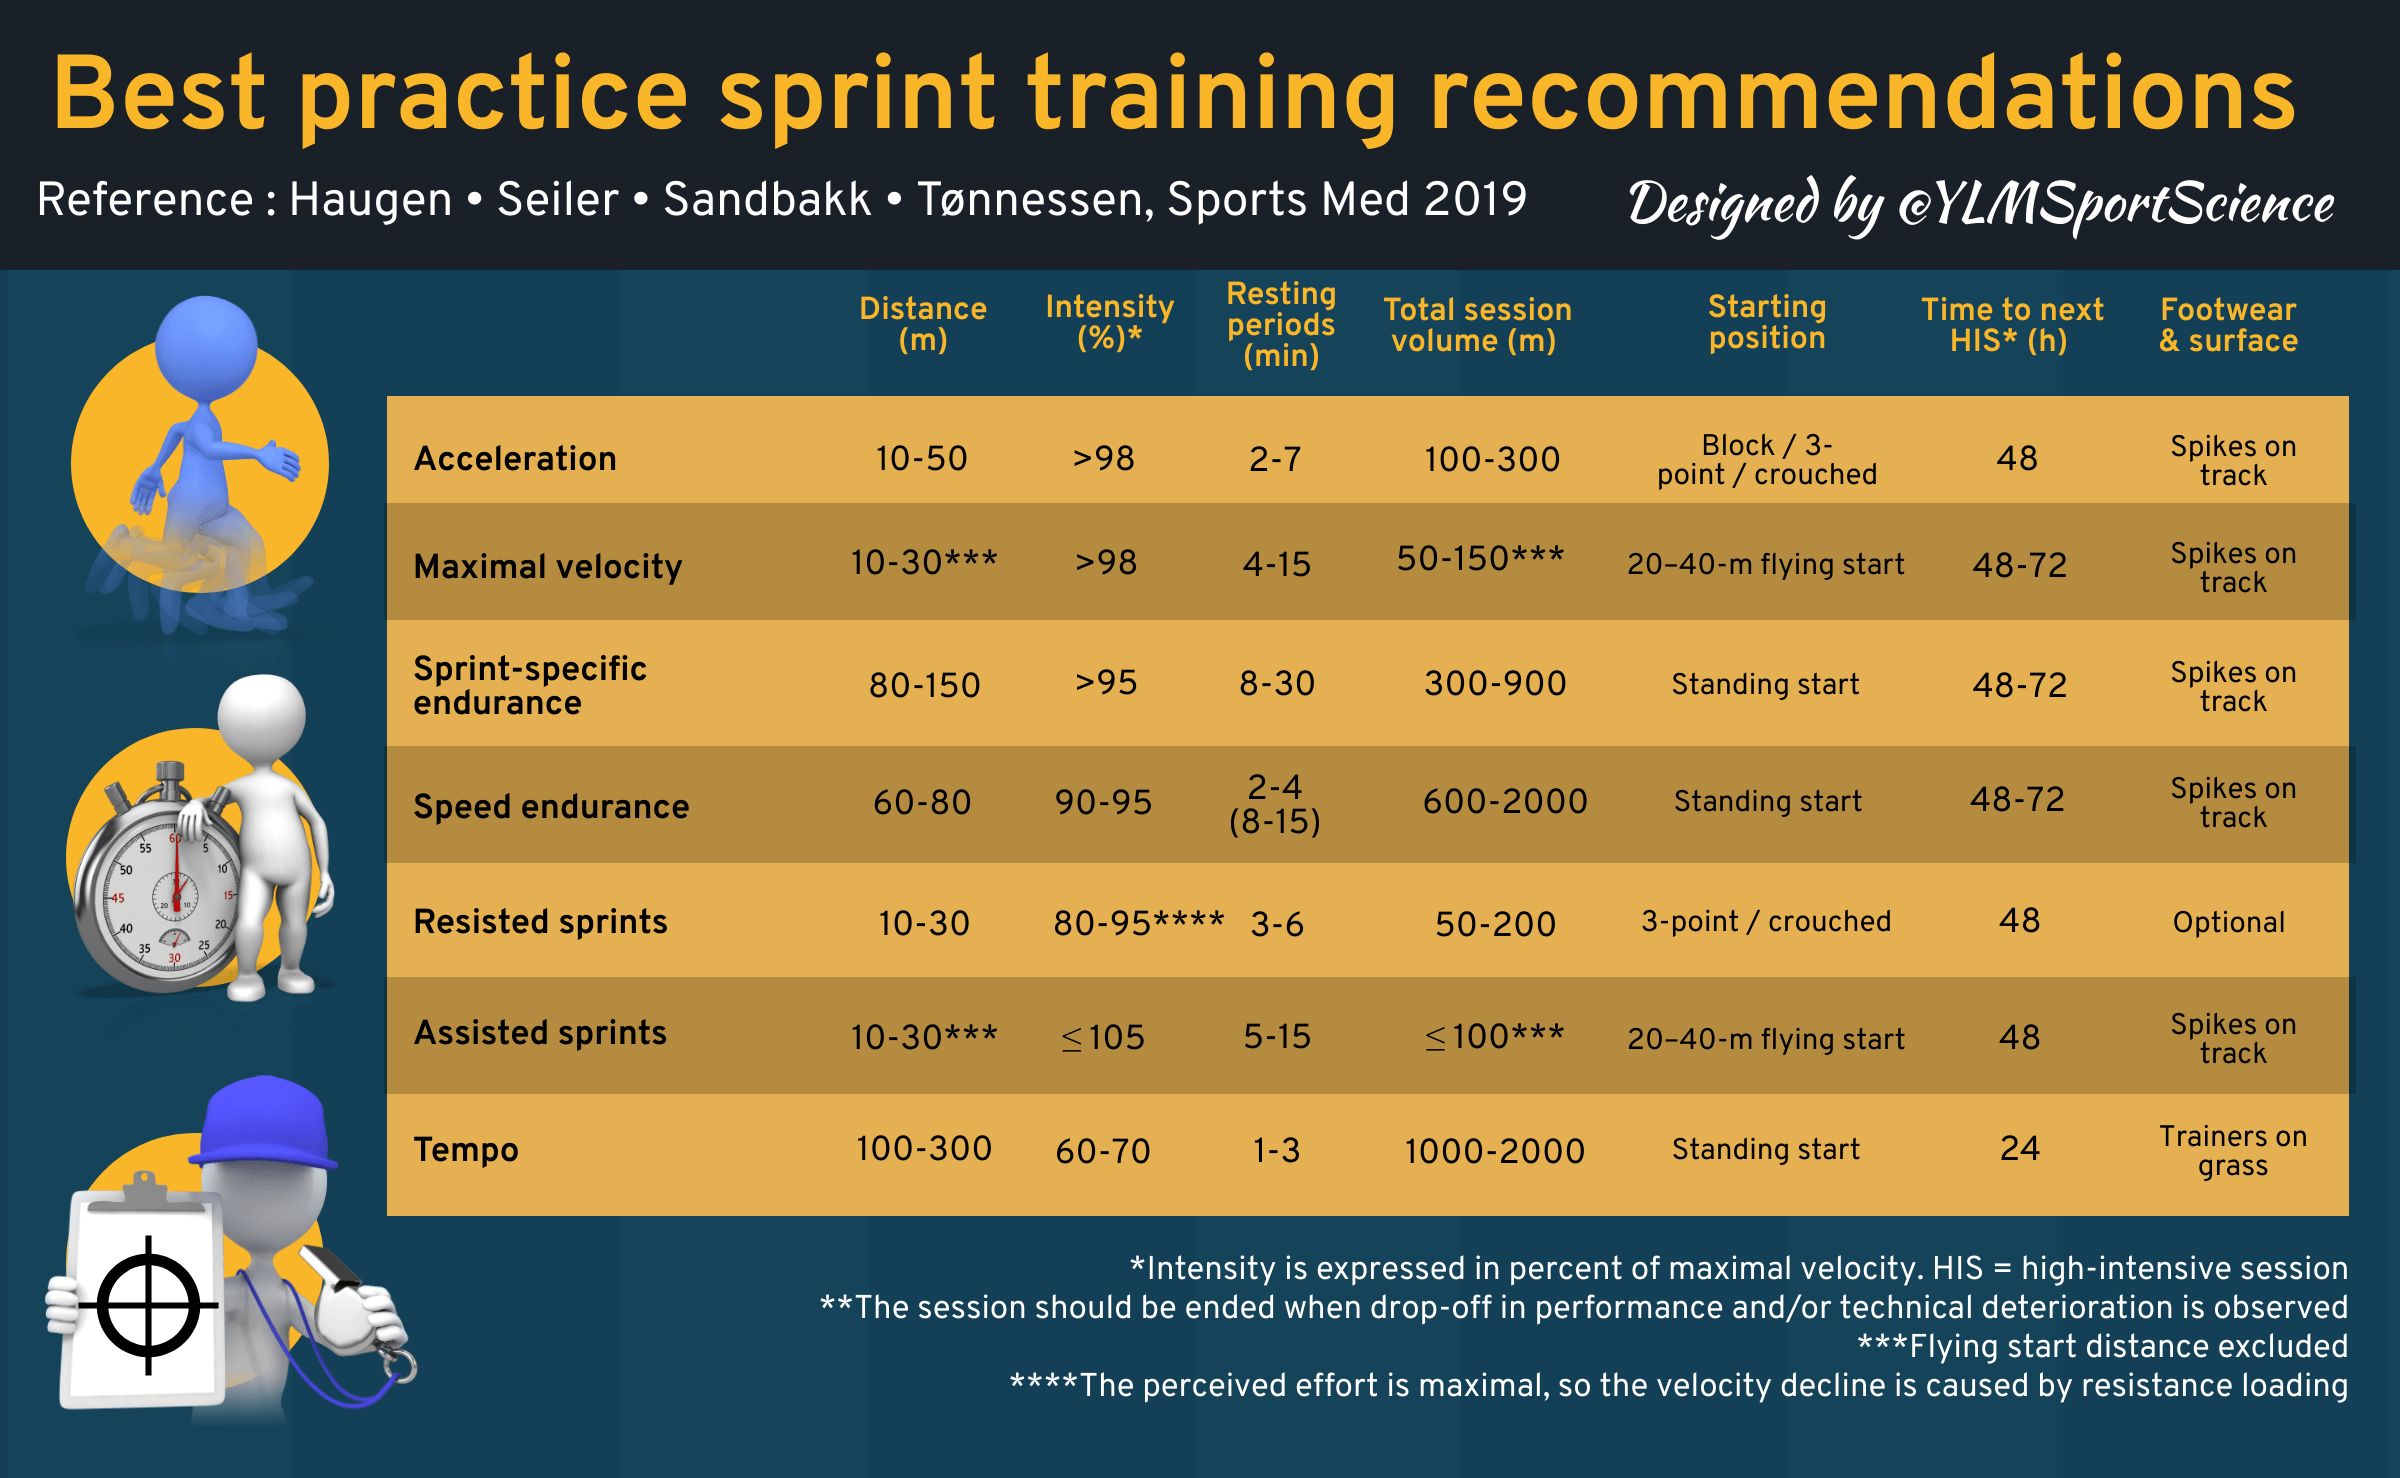 Acceleration, maximal velocity, speed endurance, resisted sprints, tempo  training, etc. : a review of best practice sprint training recommendations  – YLMSportScience